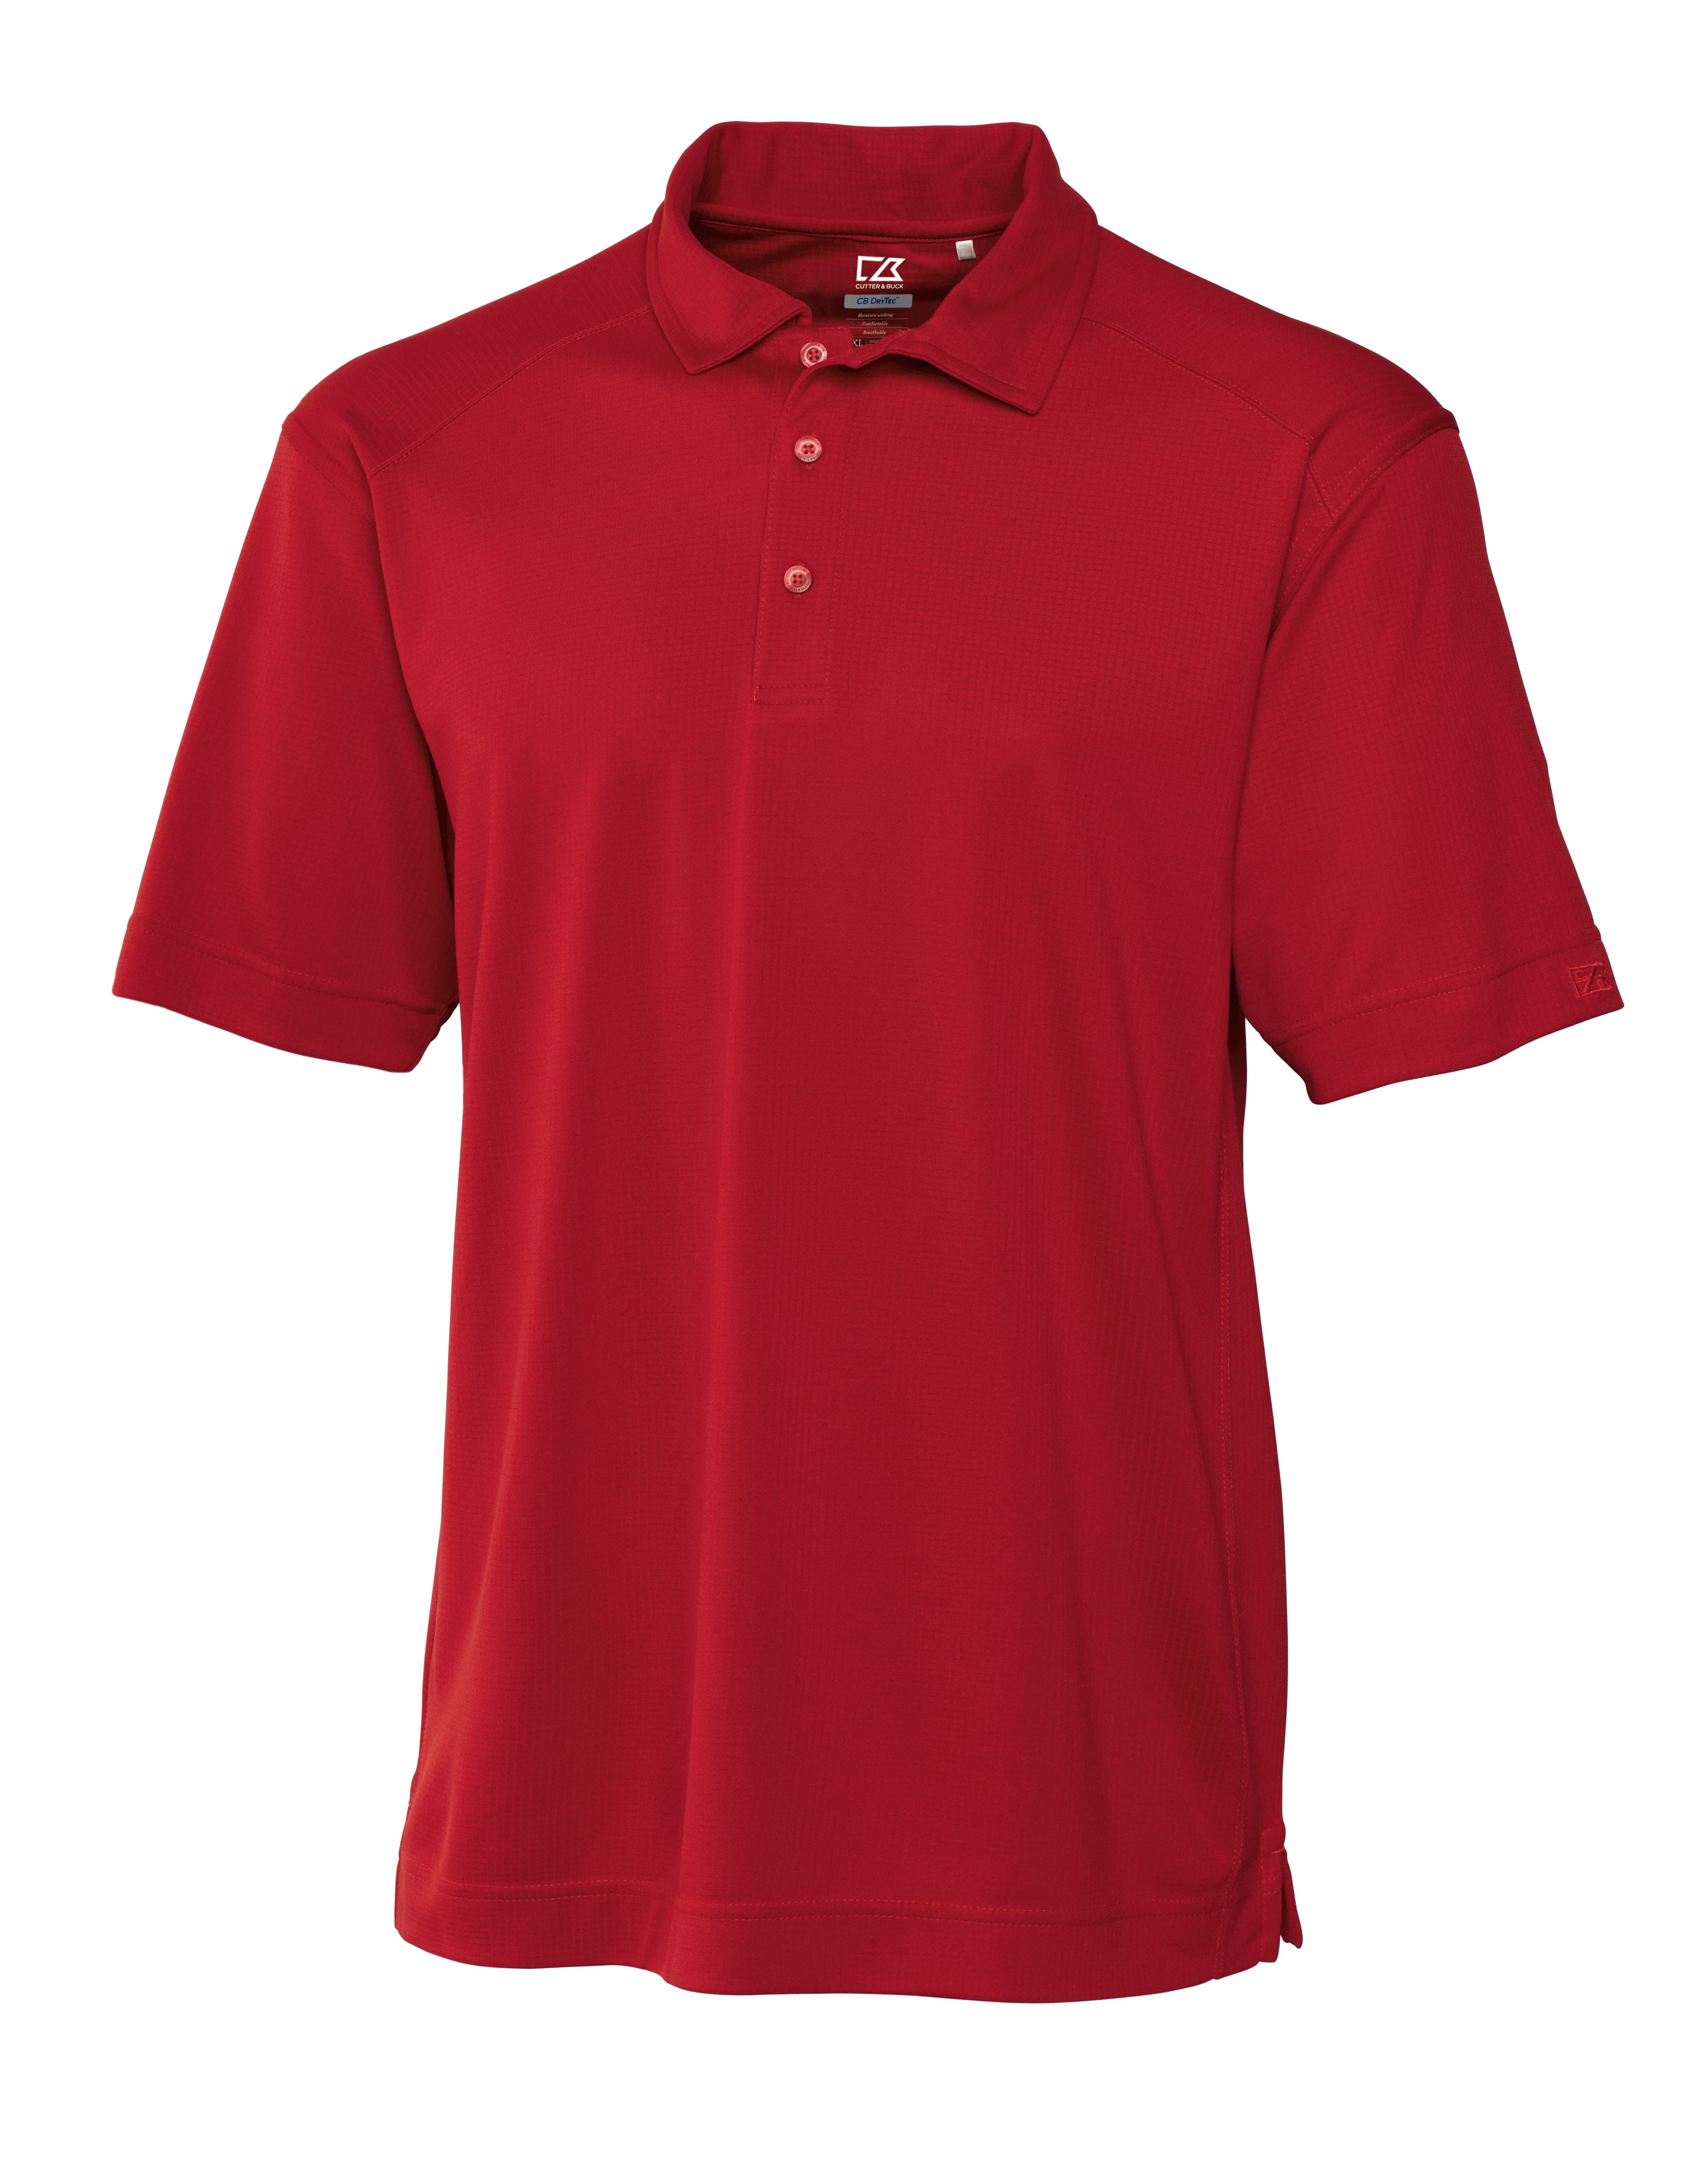 Mediate whip Limited Asquith & Fox Mens Super Smooth Knit Polo Shirt - Walmart.com